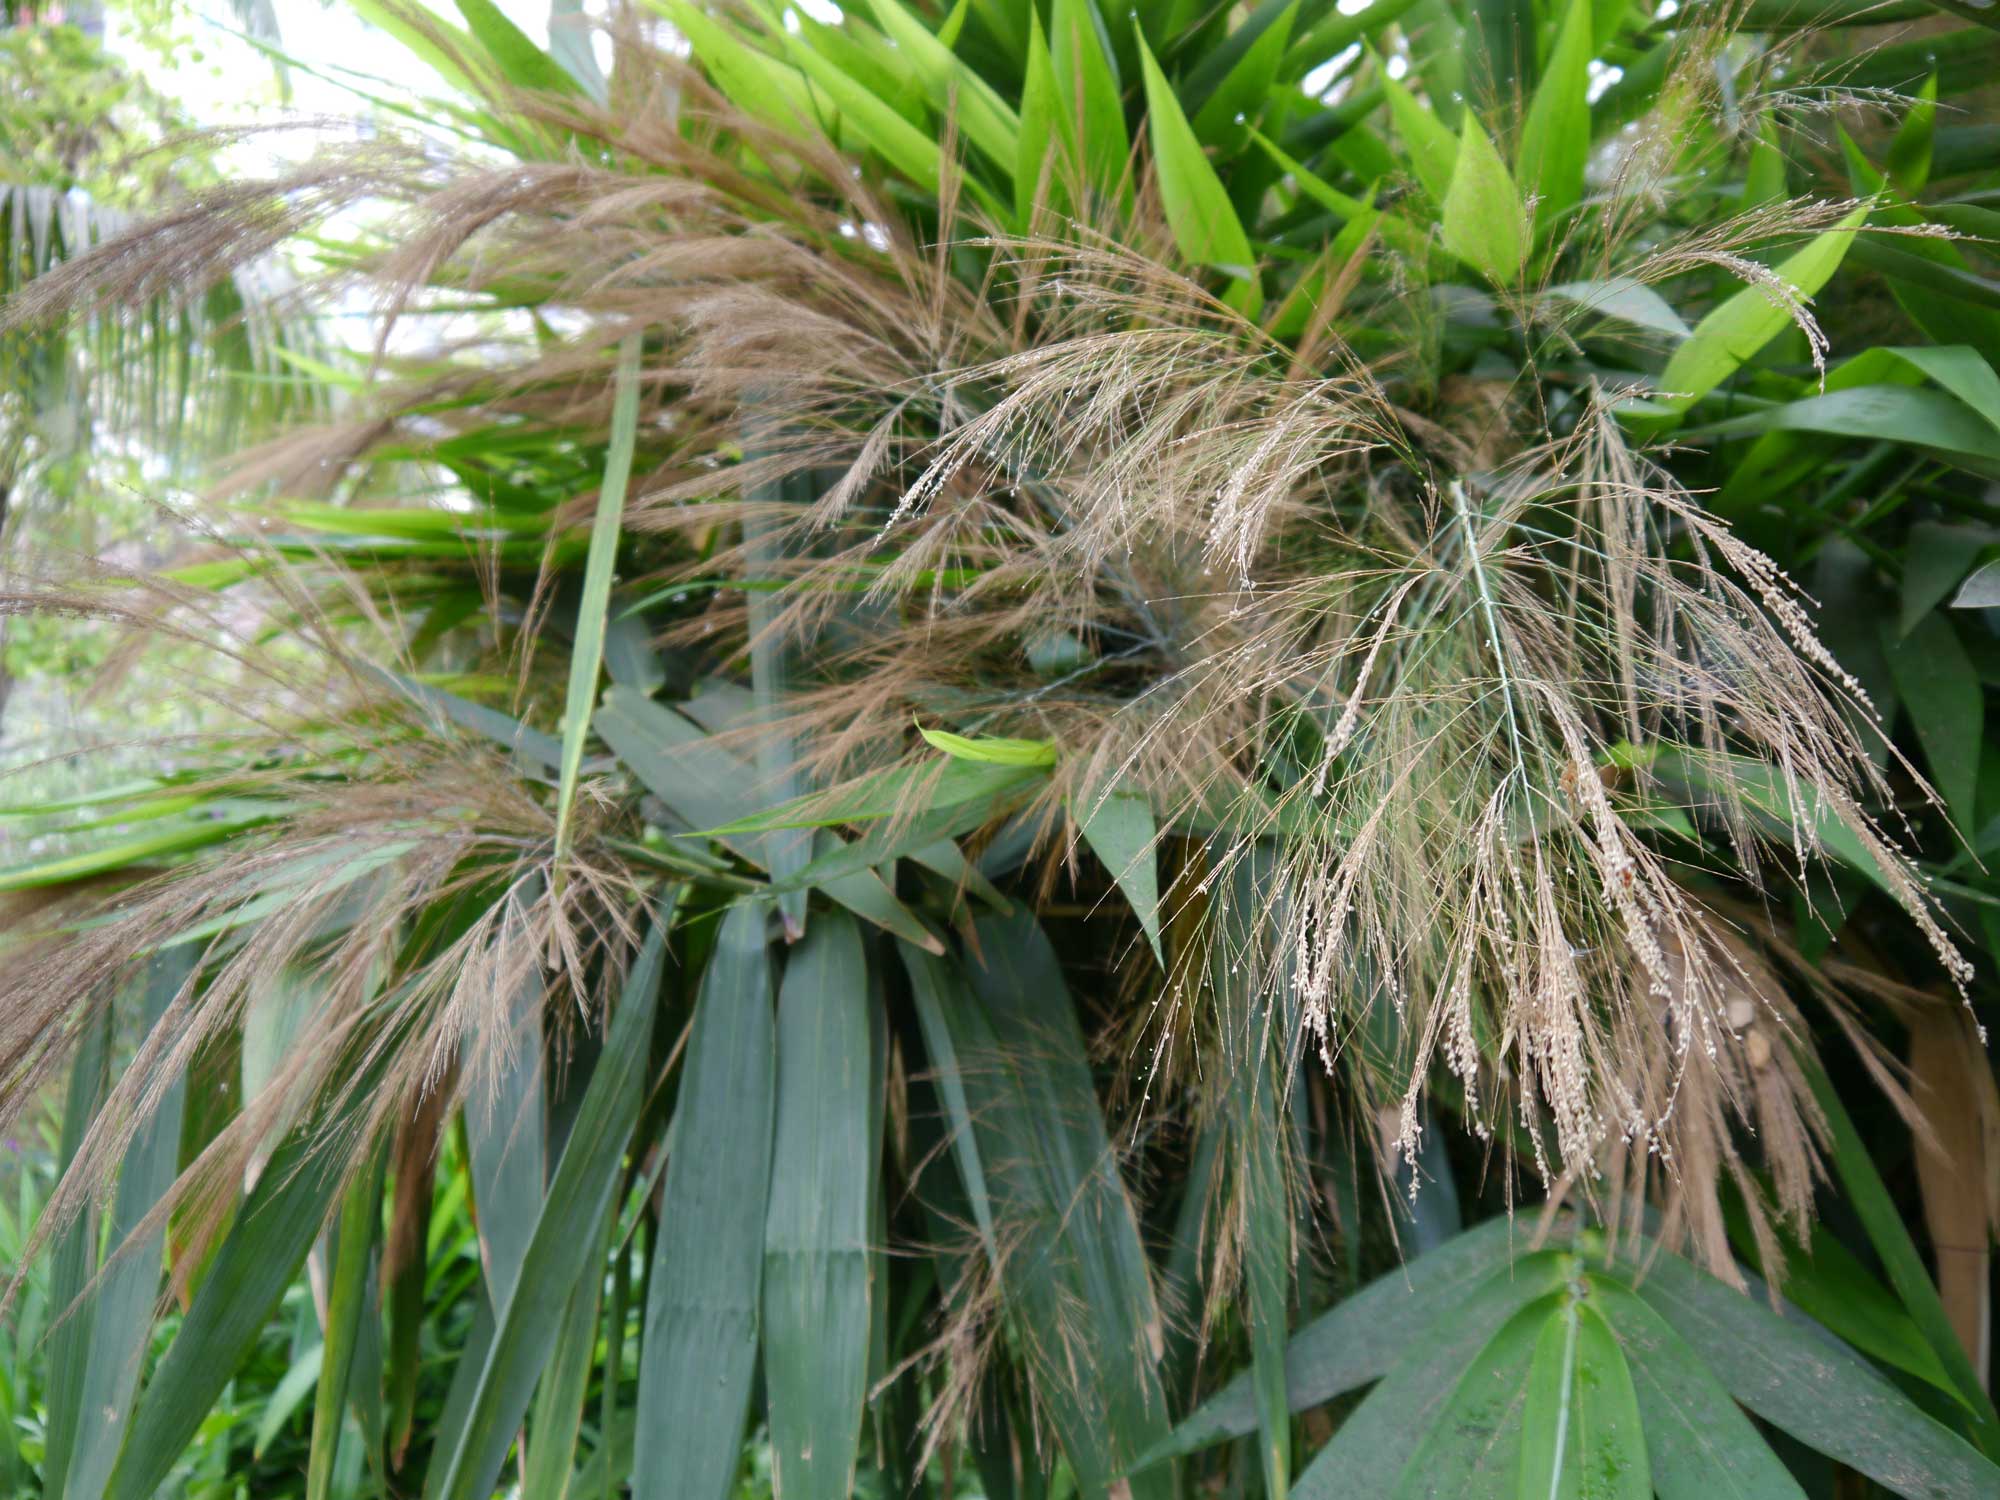 Photograph of tiger grass. The photo shows bristle-like inflorescences and elongated-obovate leaves.